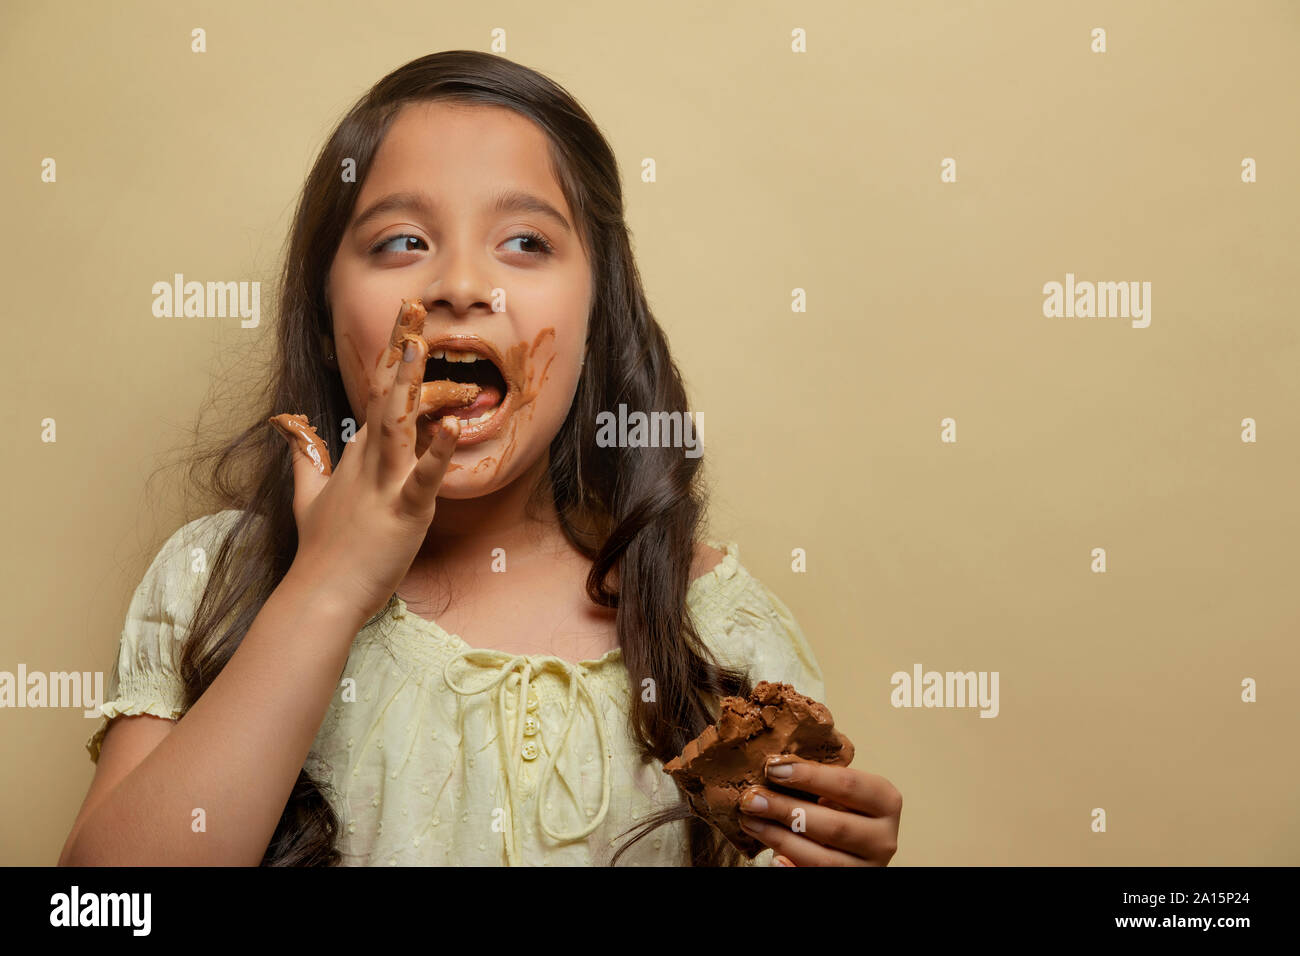 Girl Holding Chocolate Bar Hi Res Stock Photography And Images Alamy